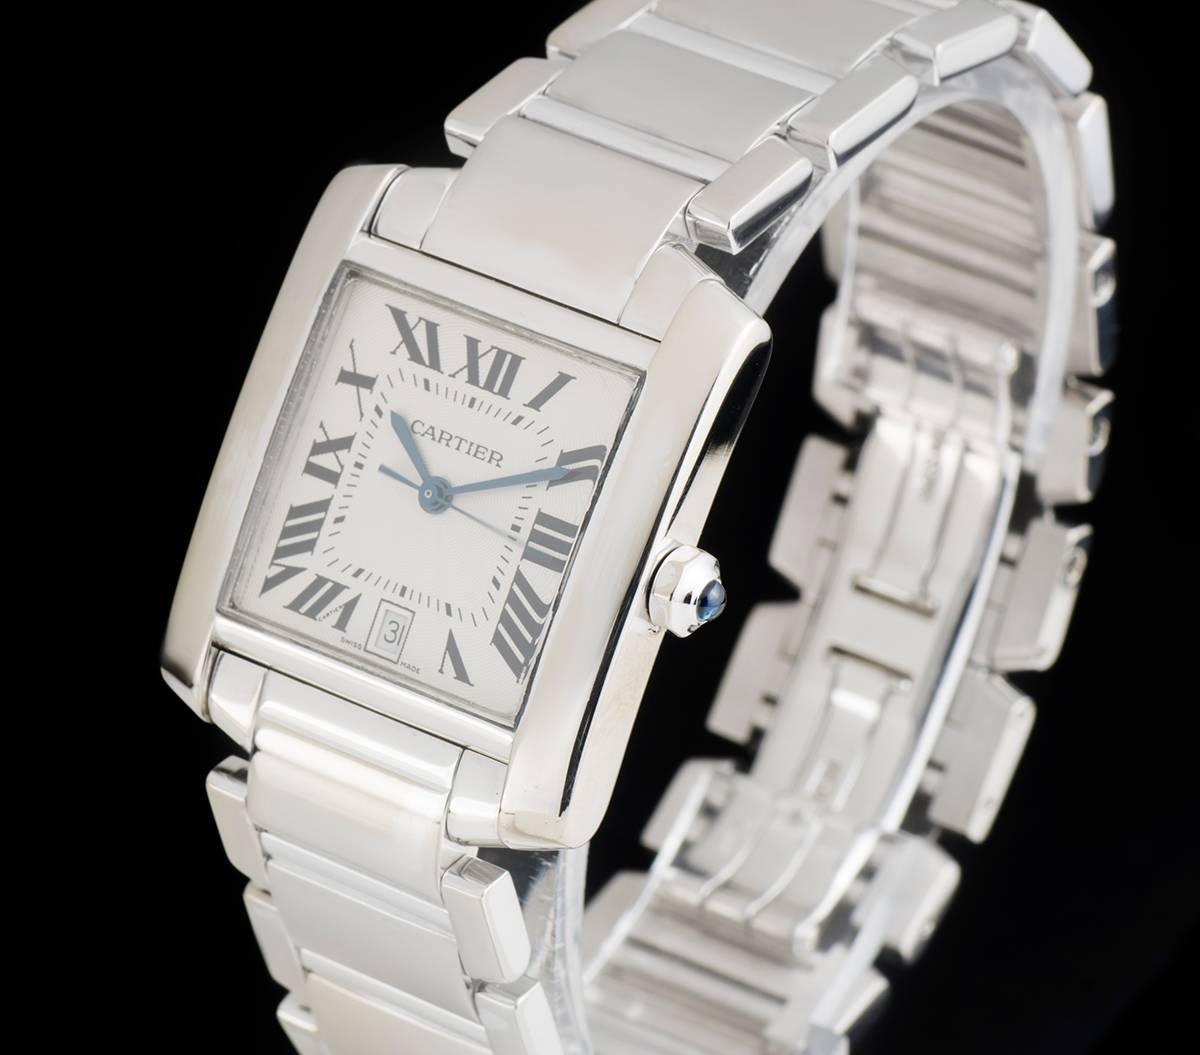 An 18k White Gold Tank Francaise Gents Wristwatch, silver guilloche dial with roman numerals and secret signature at "V" of "VII", blued steel sword shaped hands, date at 6 0'clock, a fixed 18k white gold bezel, an 18k white gold